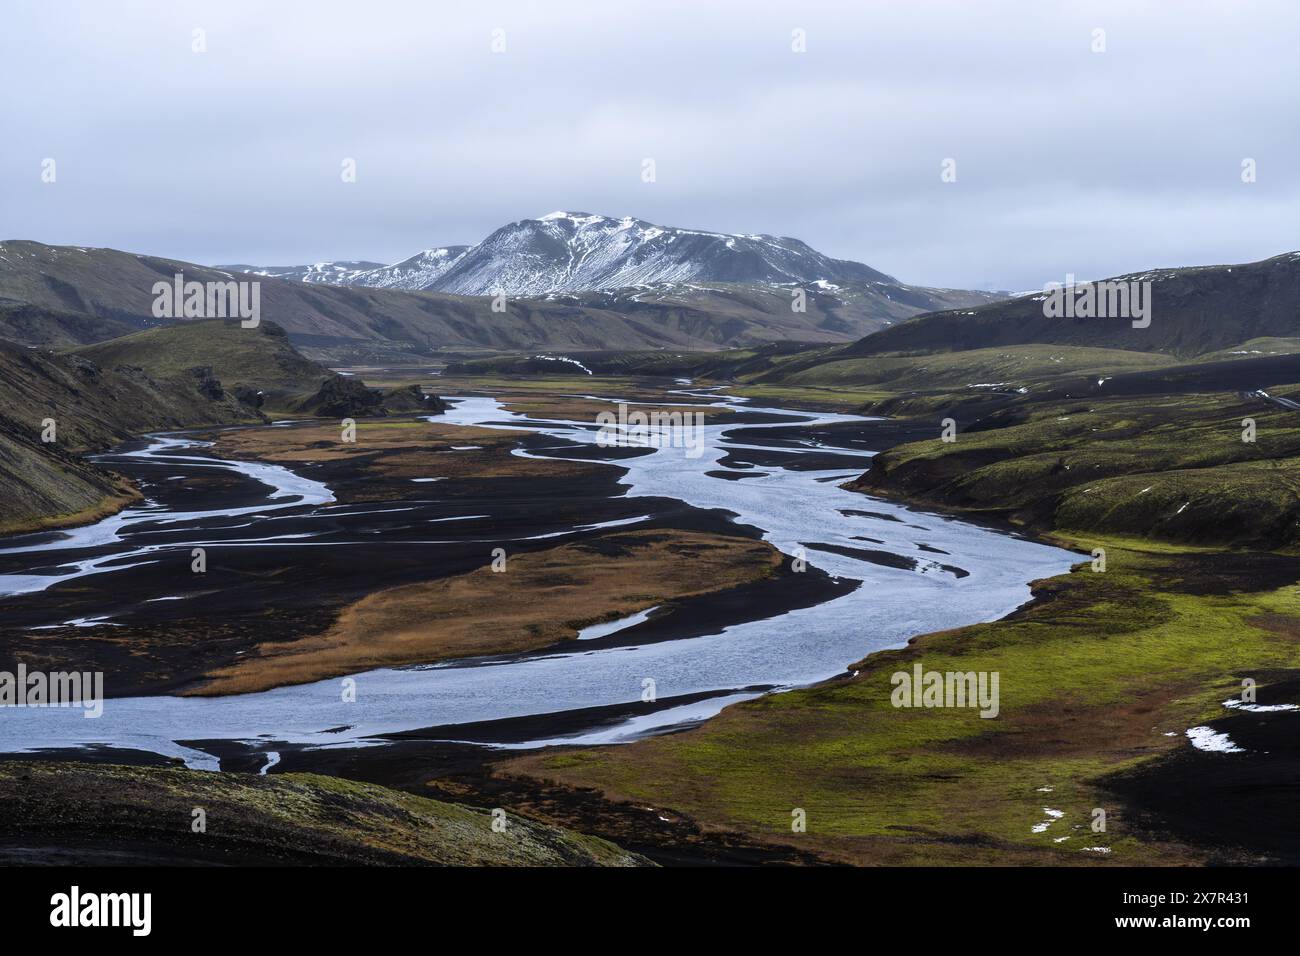 A tranquil river meanders through the verdant valleys and volcanic hills of the Icelandic highlands, showcasing nature's splendor Stock Photo